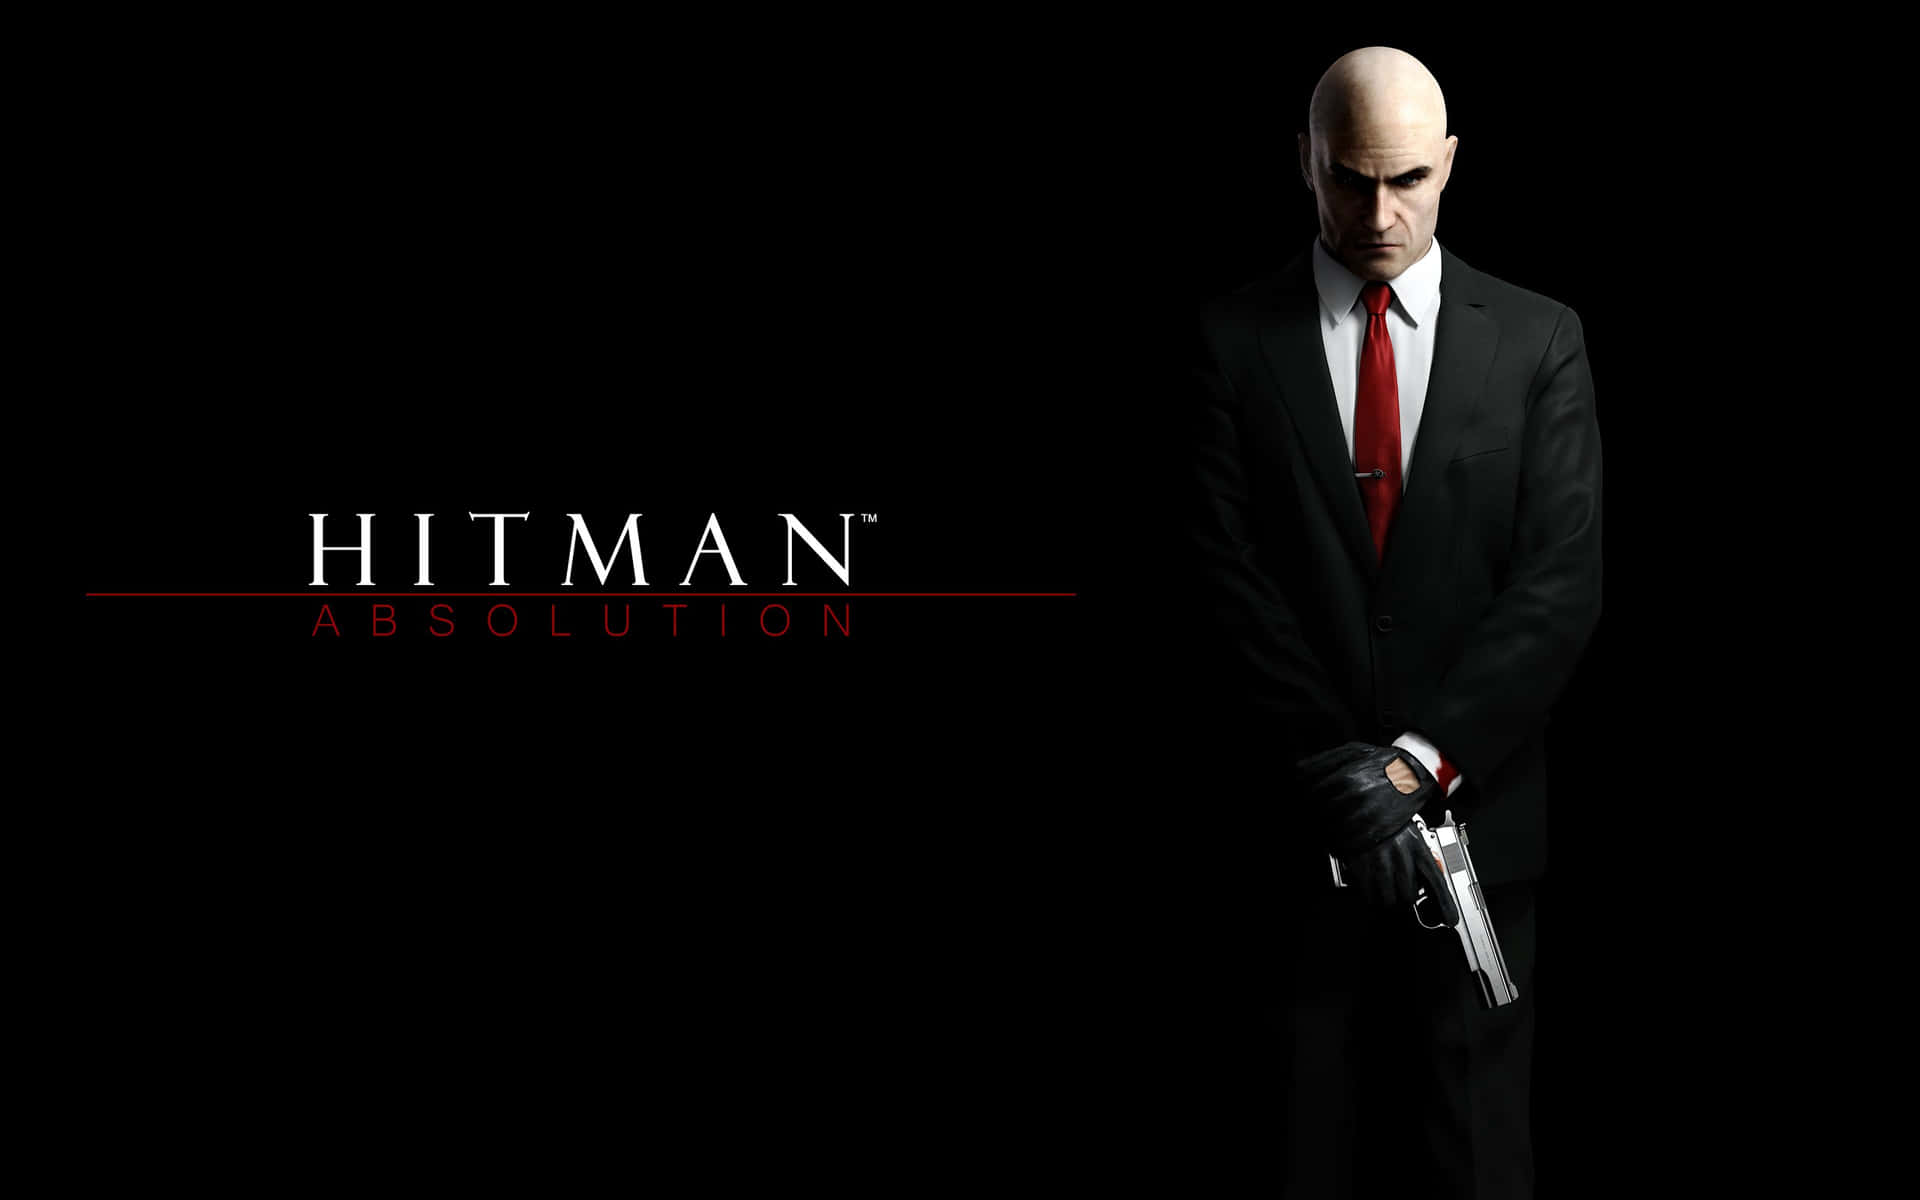 Agent 47 in Hitman Absolution